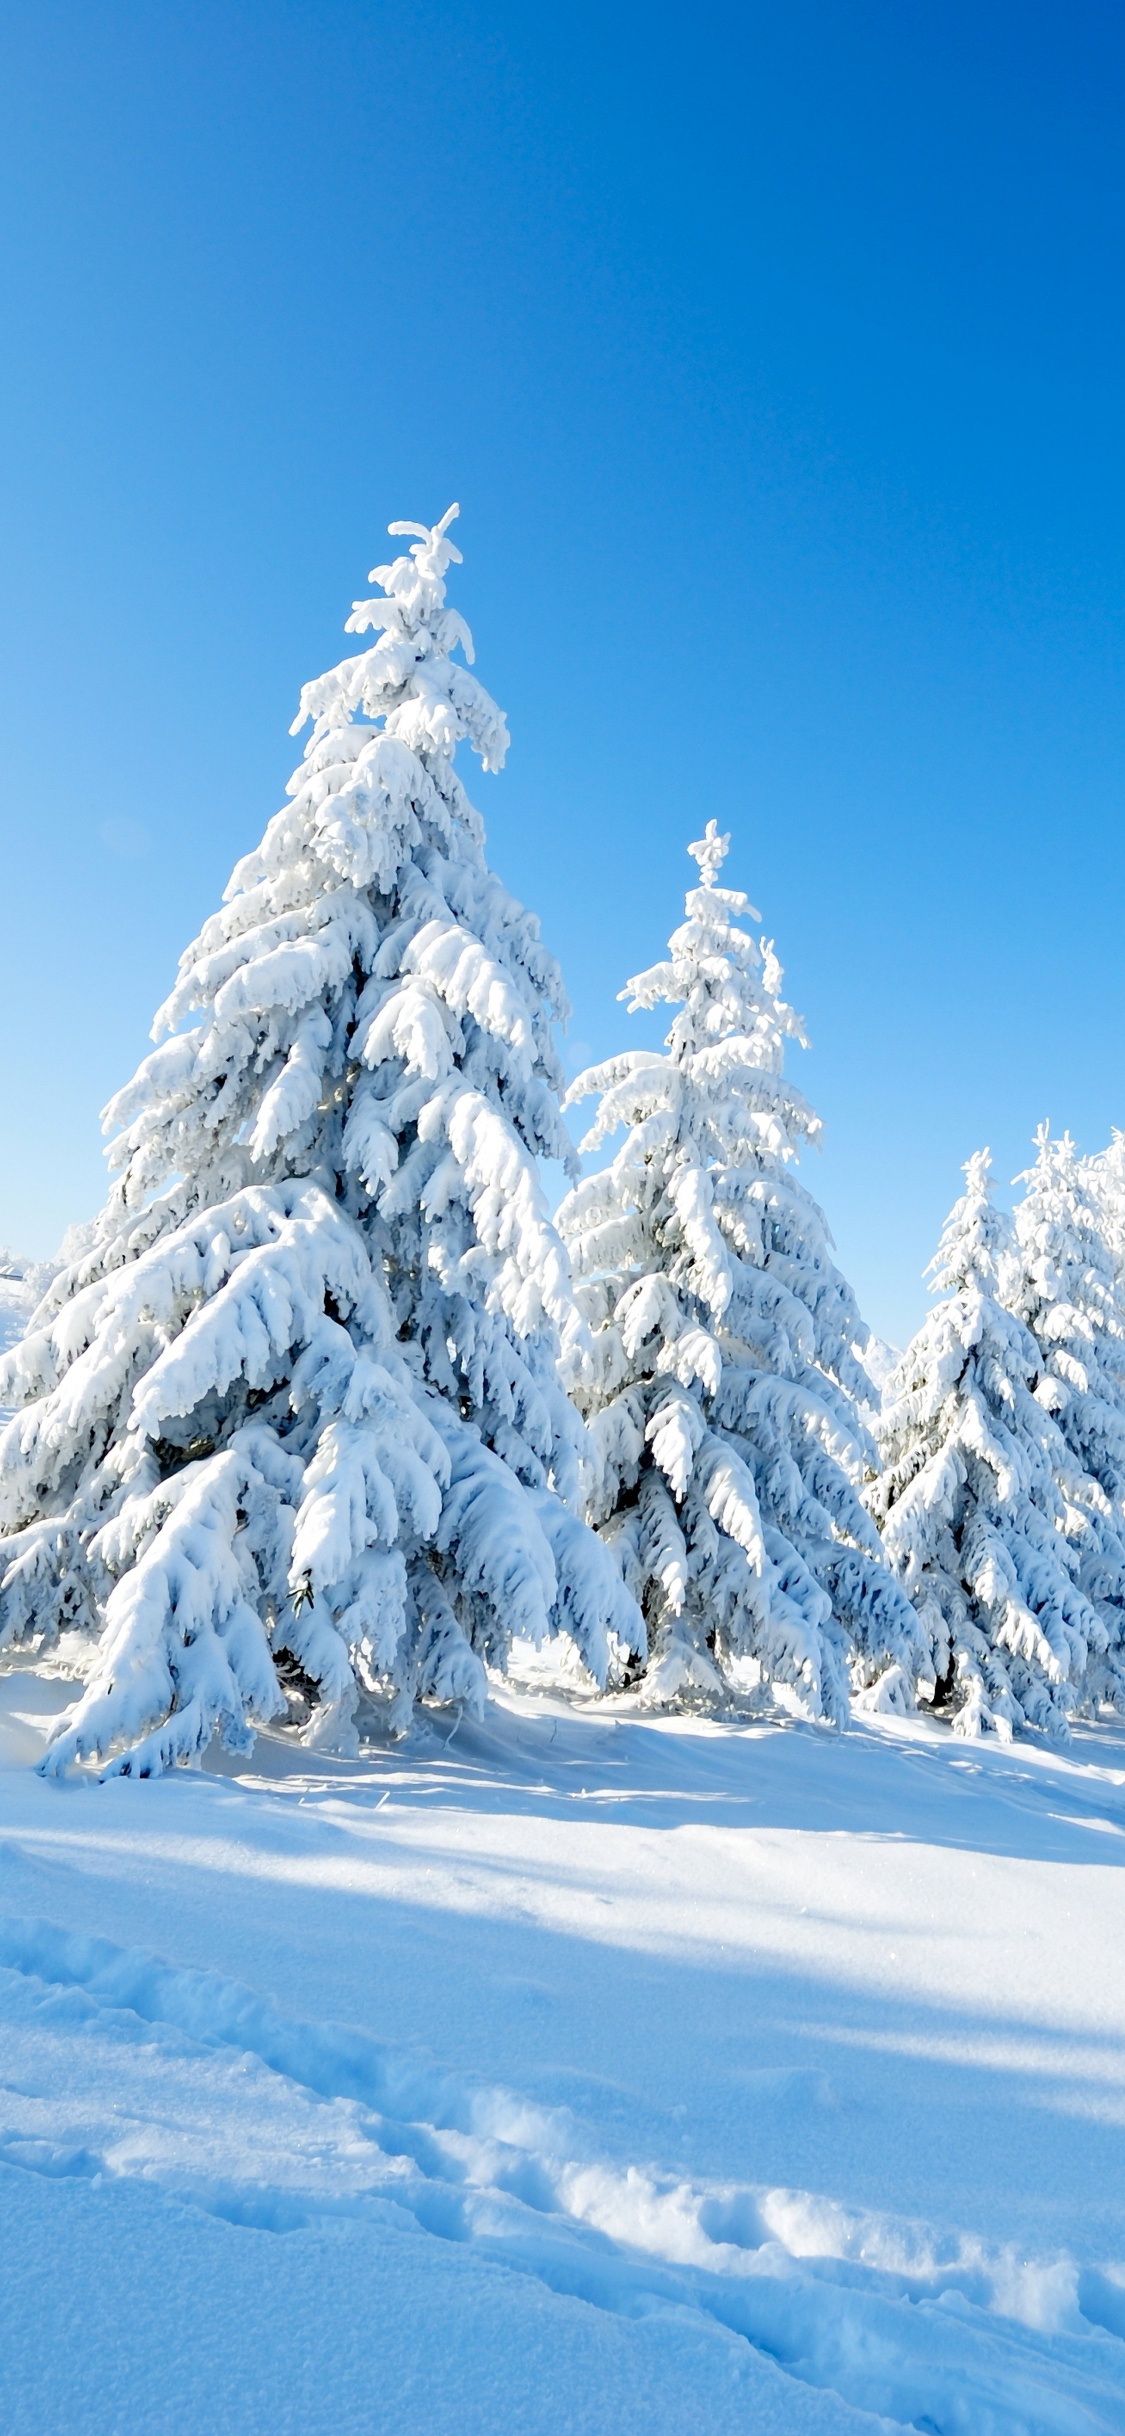 Snow Covered Pine Trees on Snow Covered Ground Under Blue Sky During Daytime. Wallpaper in 1125x2436 Resolution